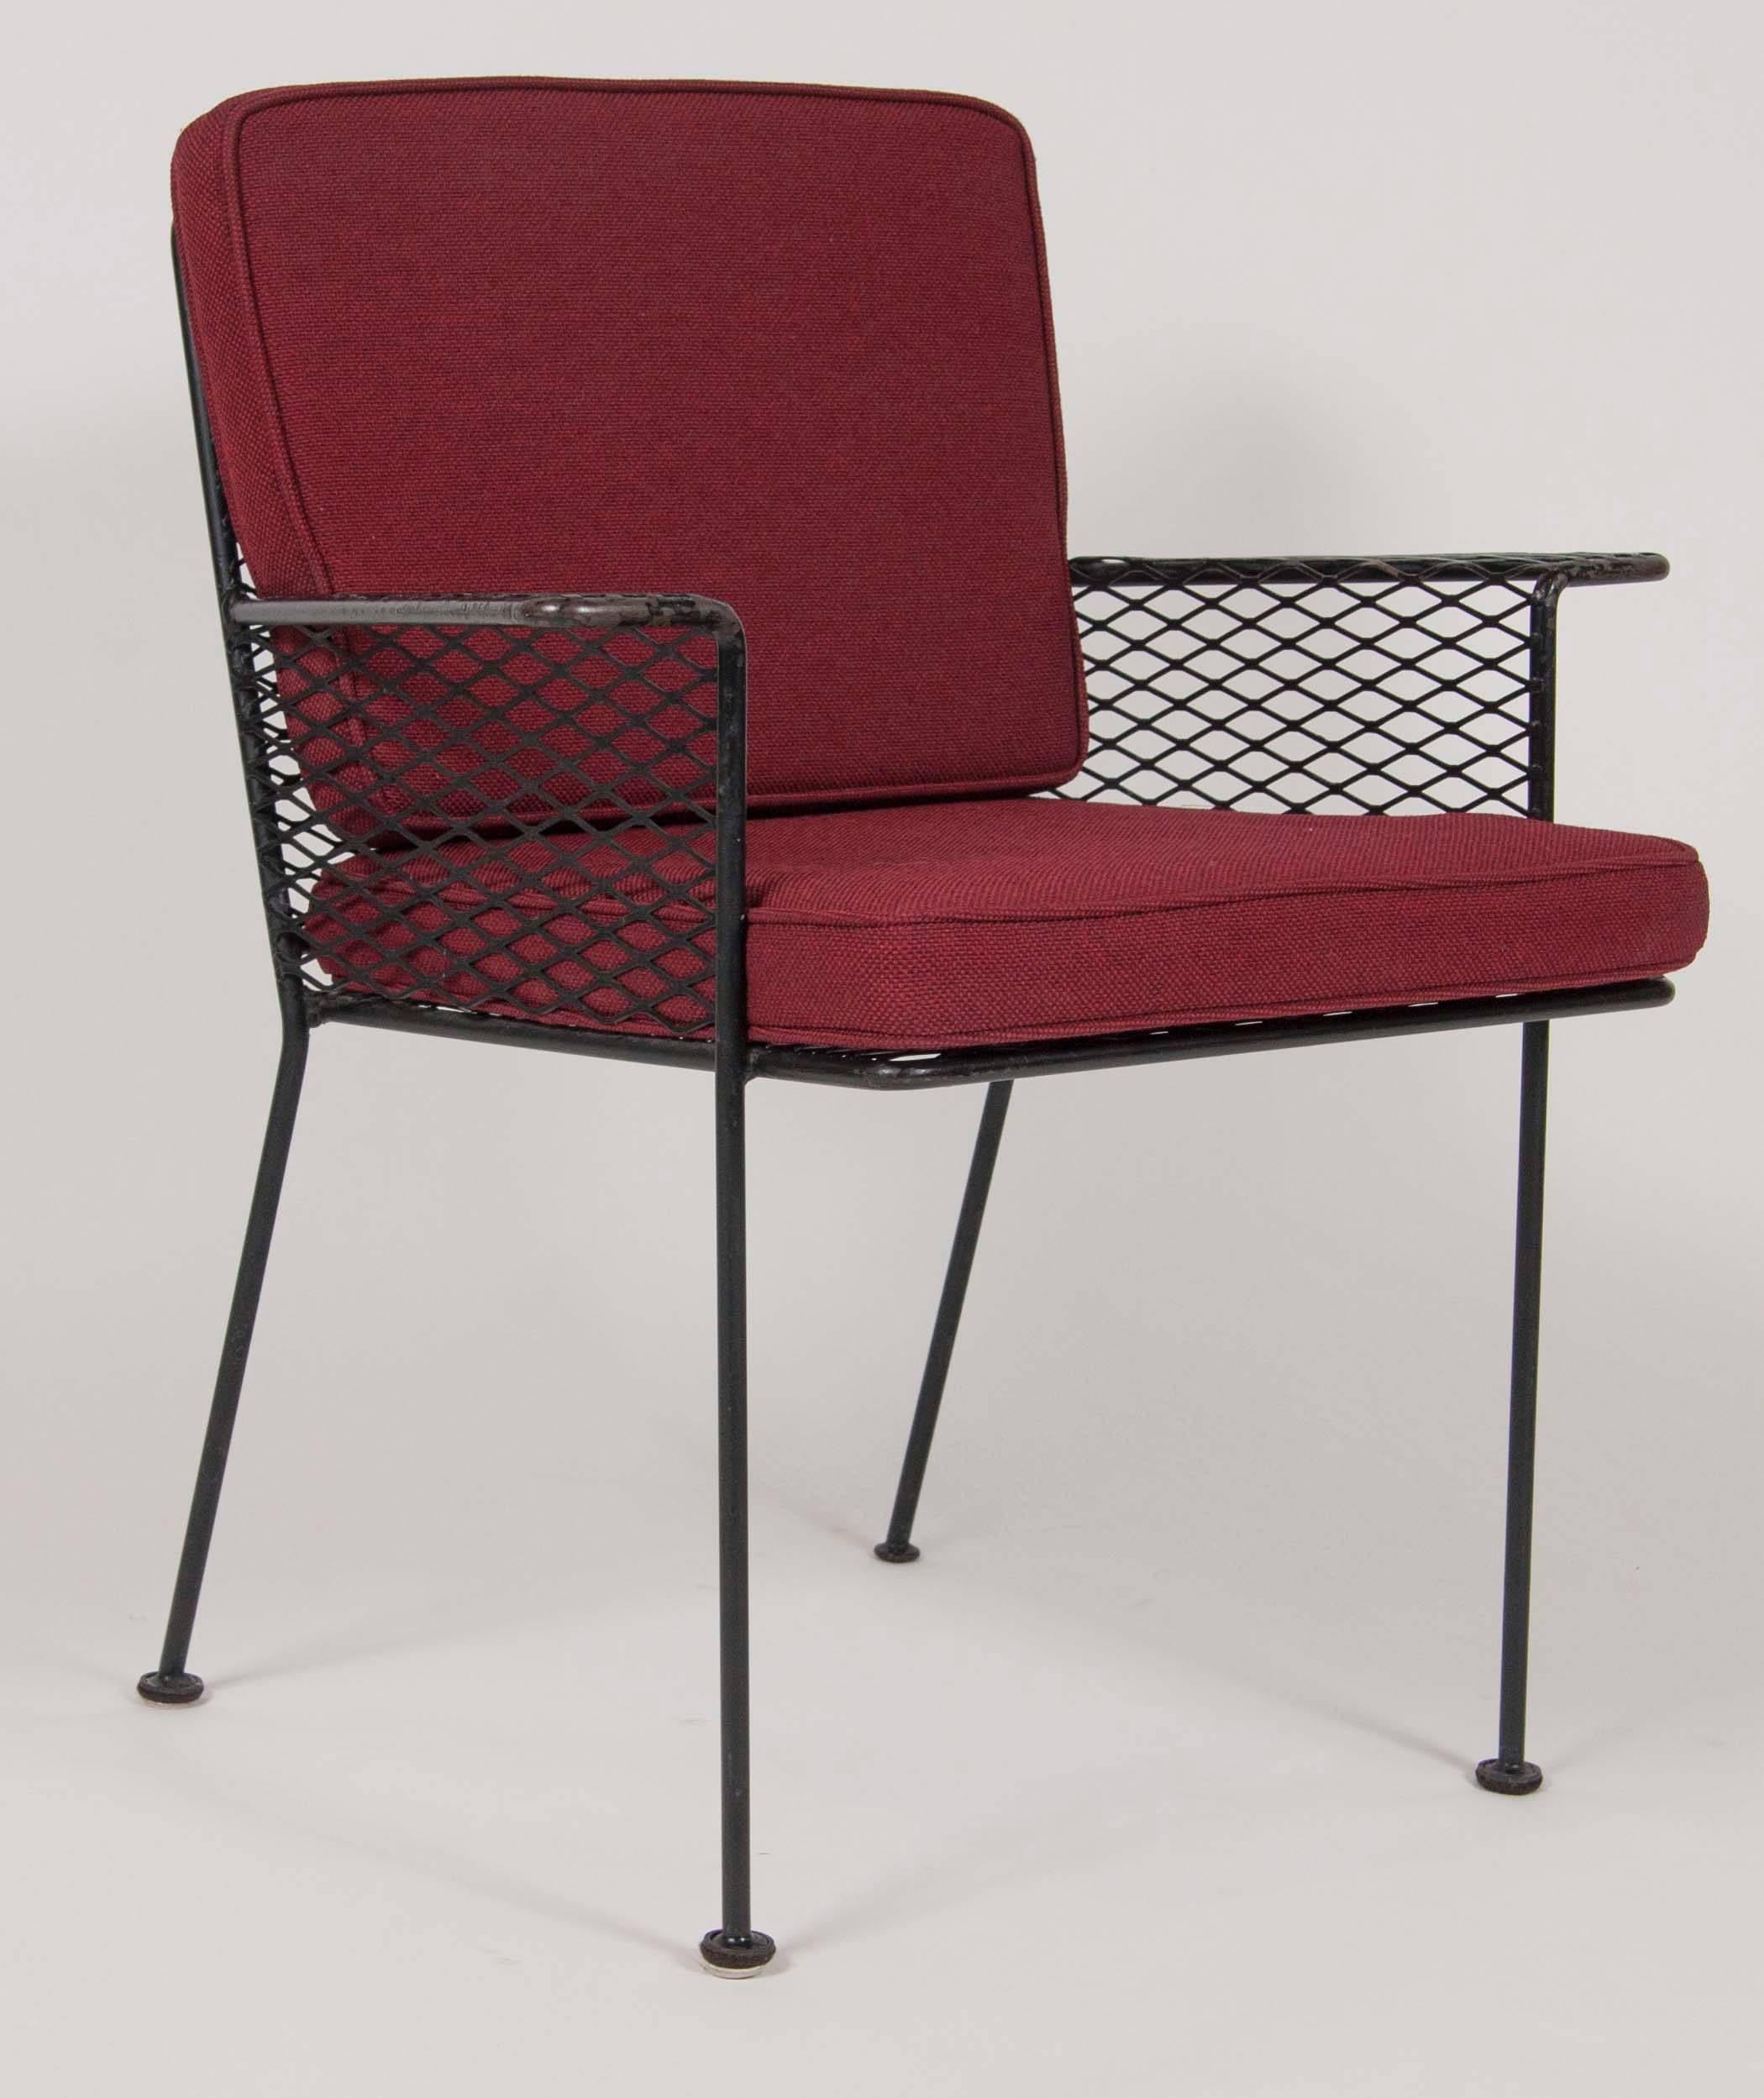 Mid-20th Century Rare Set of Four Armchairs and Four Side Chairs Designed by Van Keppel-Green 